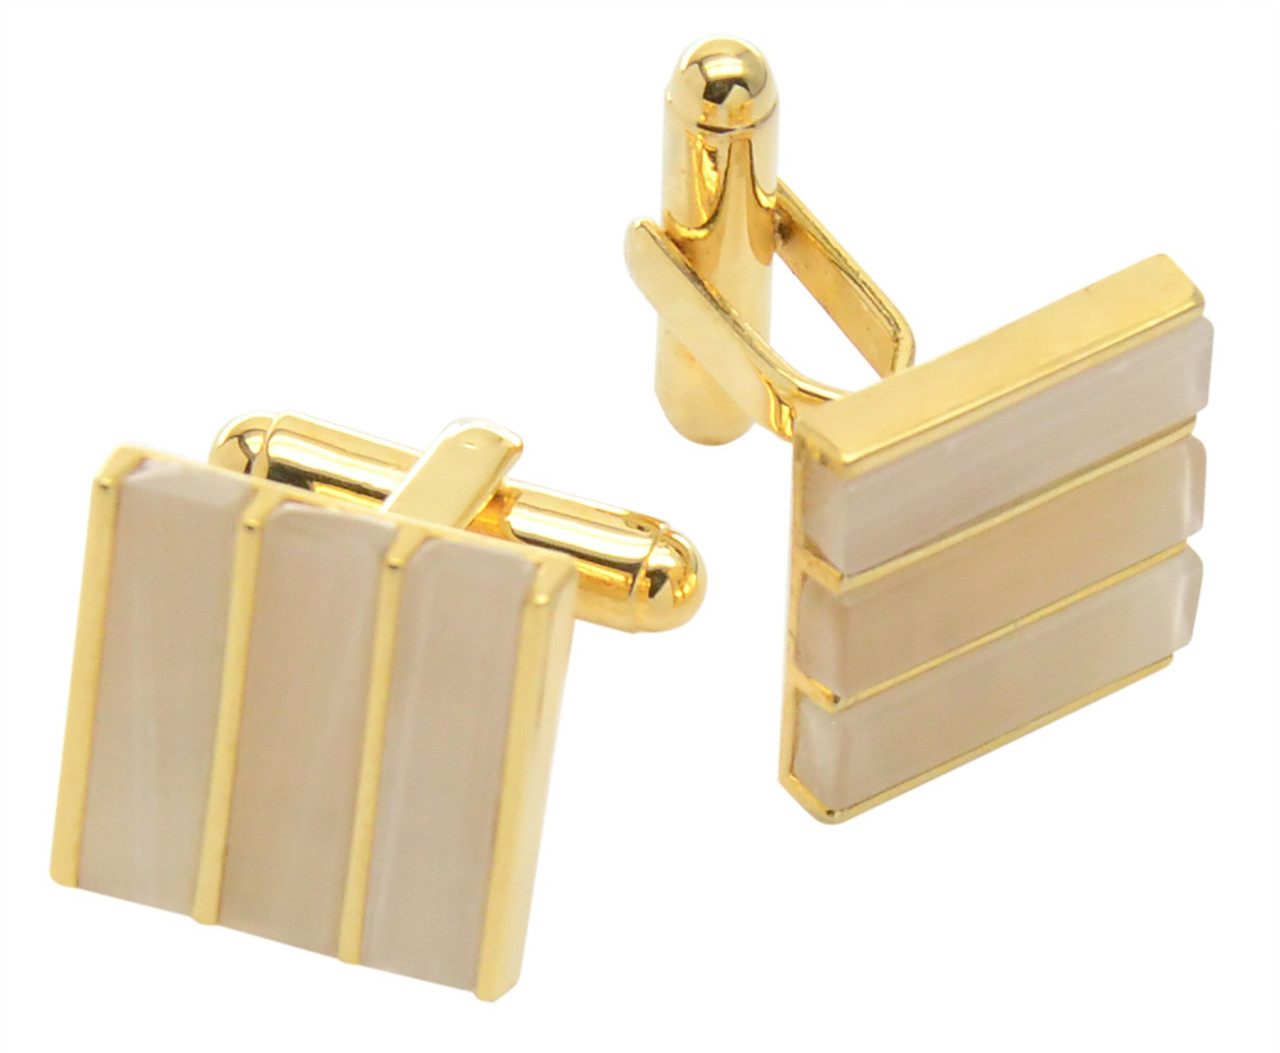 Mens Square Cuff Links in Gold